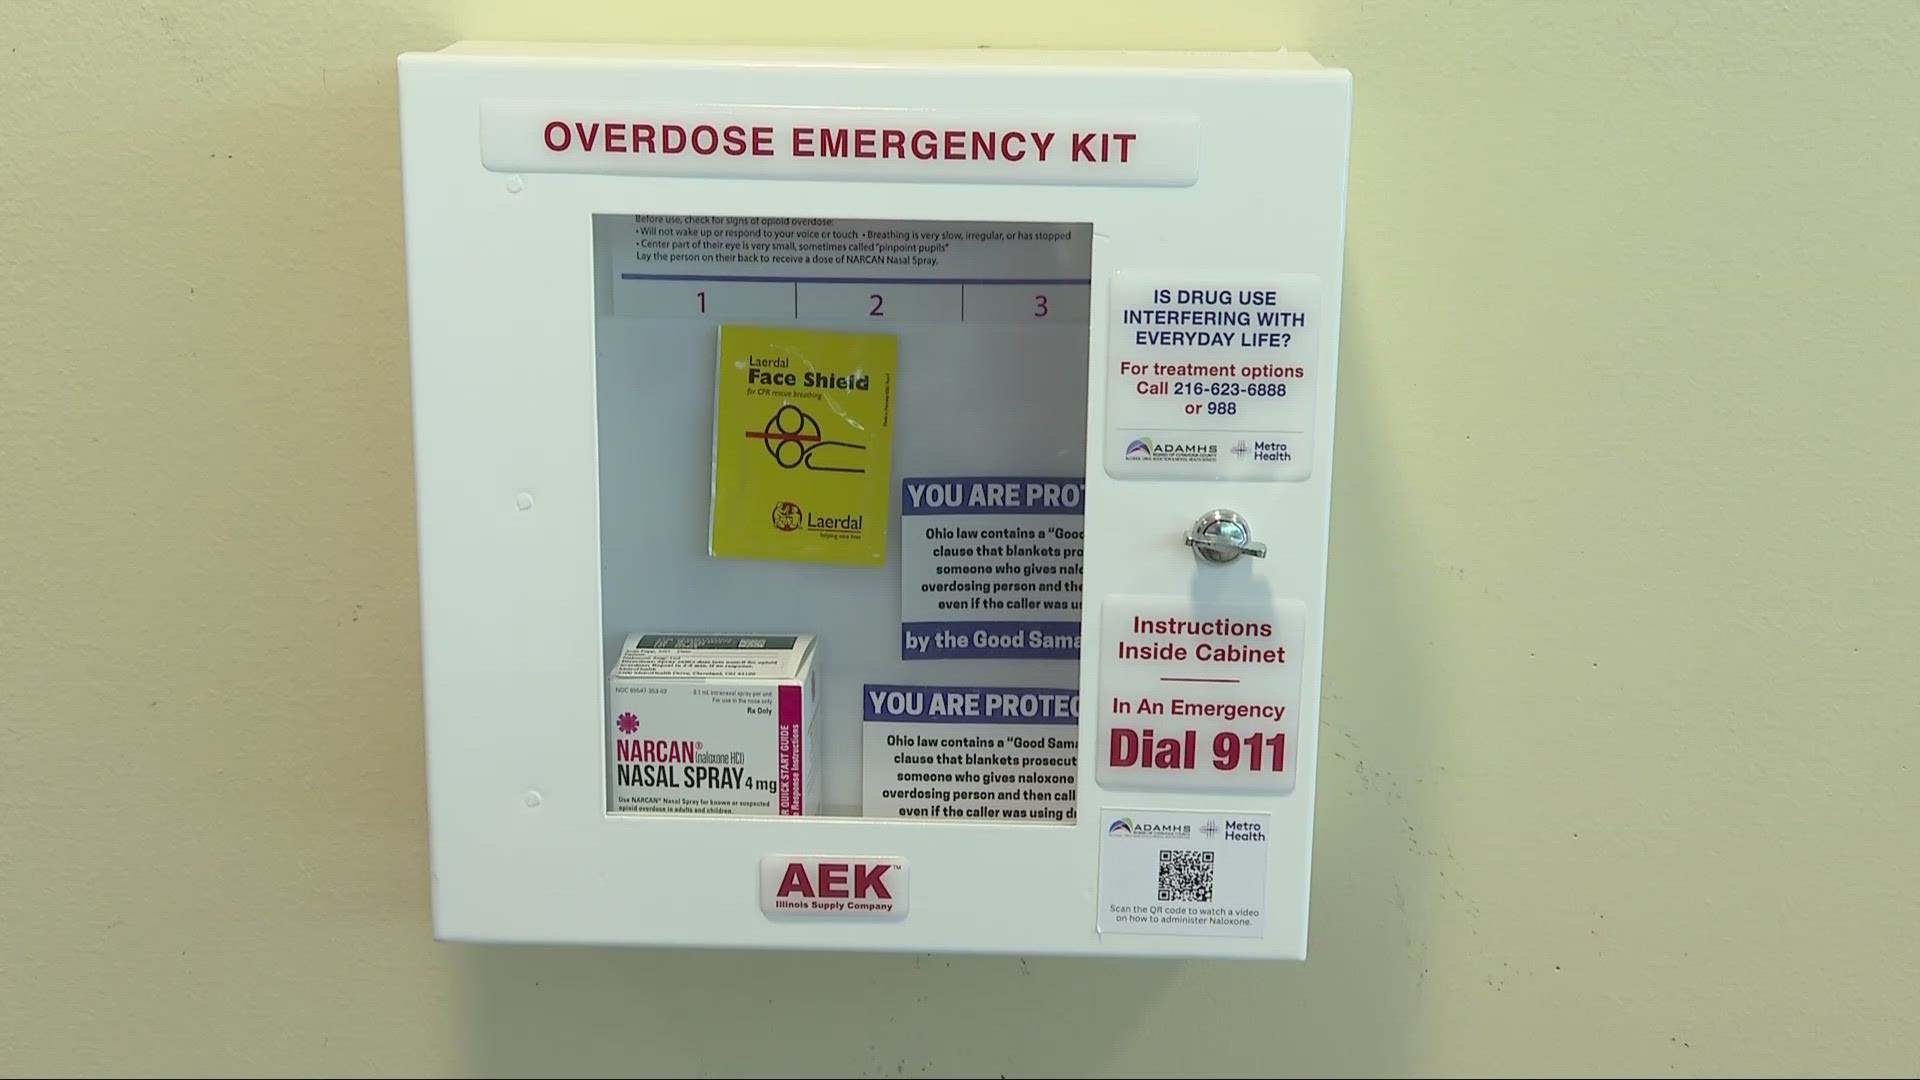 The partnership comes after unintentional drug overdoses resulted in nearly four times as many deaths as motor vehicle crashes across Ohio in 2022.